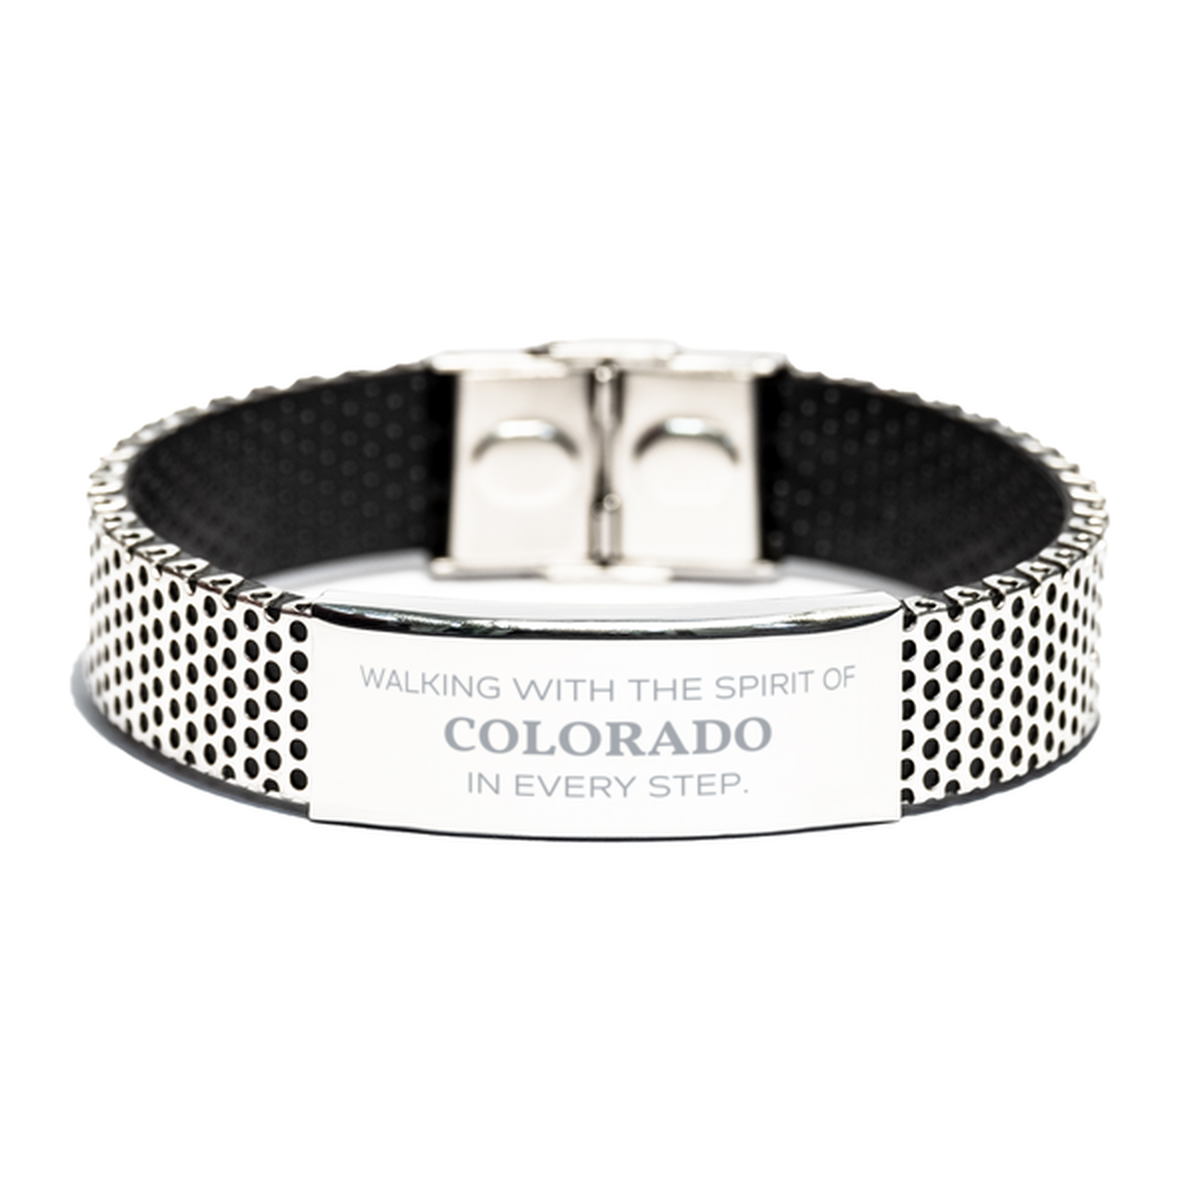 Colorado Gifts, Walking with the spirit, Love Colorado Birthday Christmas Stainless Steel Bracelet For Colorado People, Men, Women, Friends